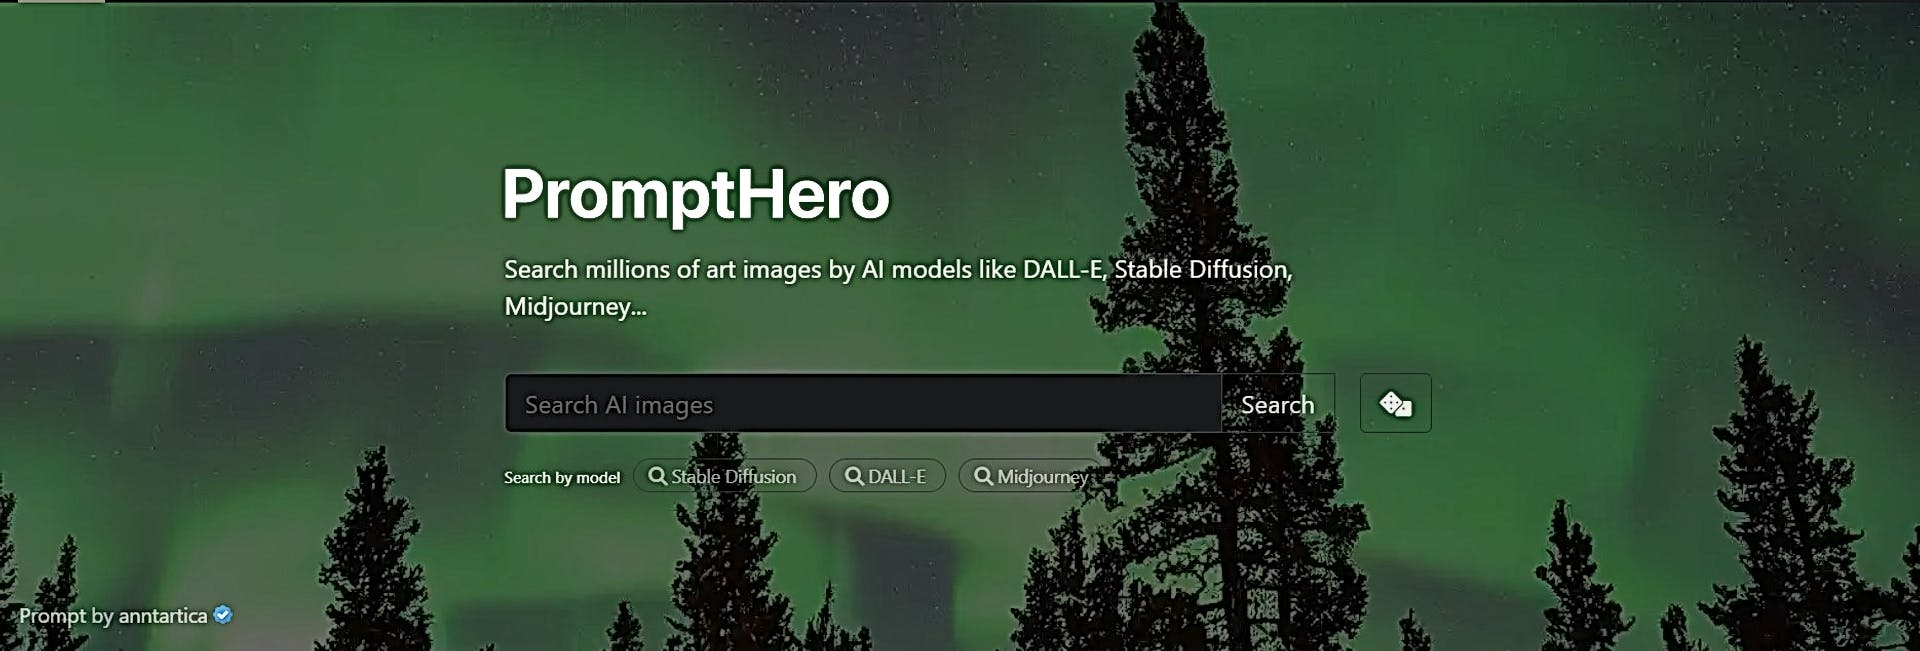 PromptHero featured